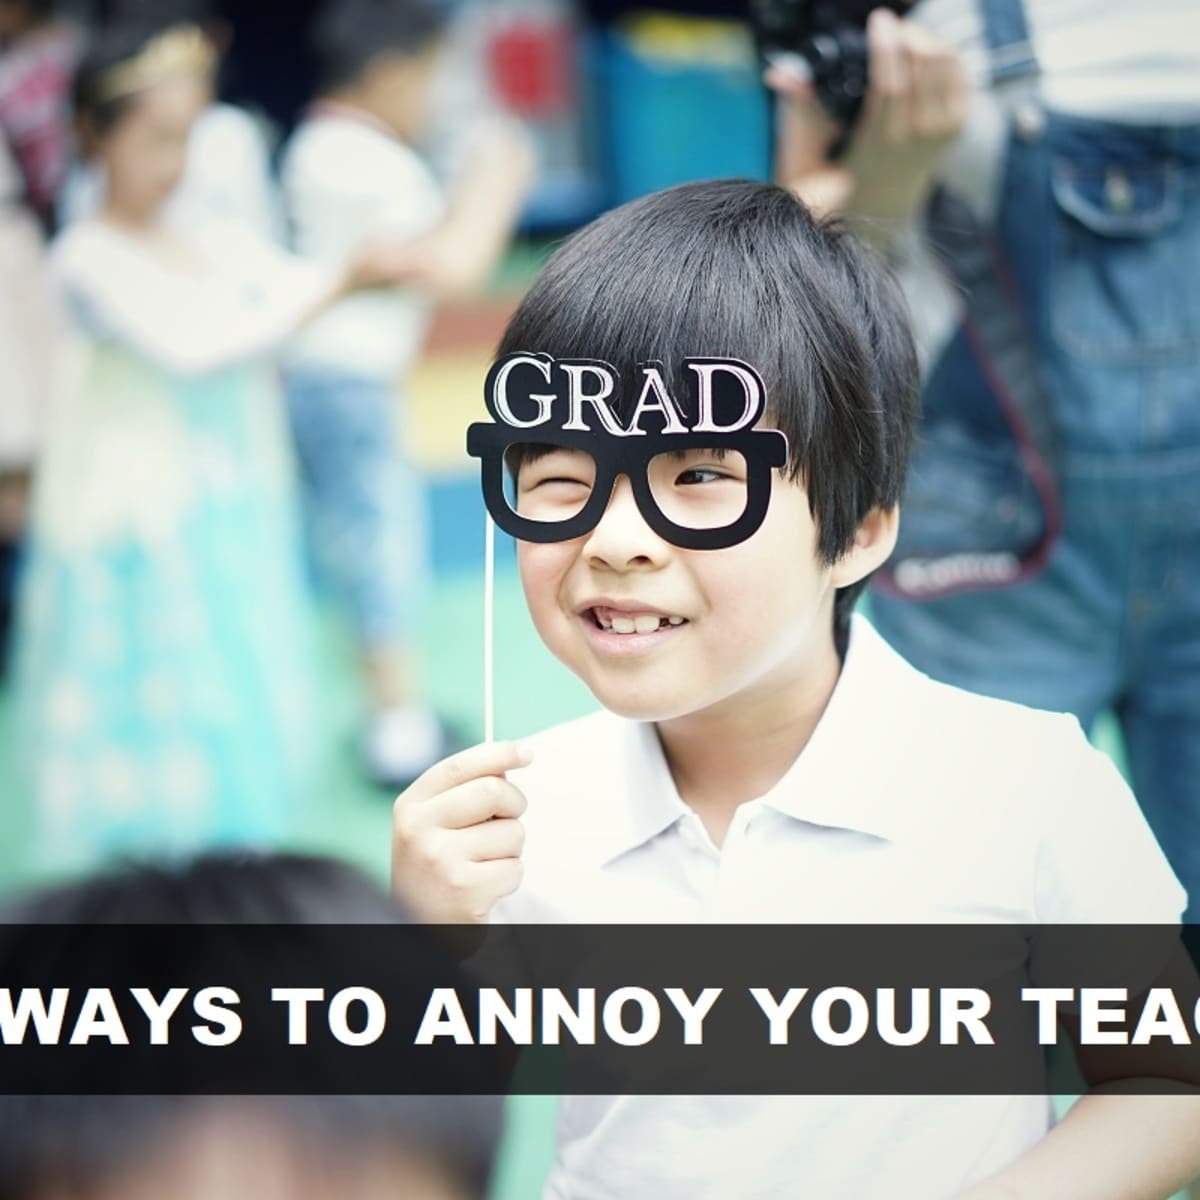 150+ Ways to Annoy Your Teacher - LetterPile